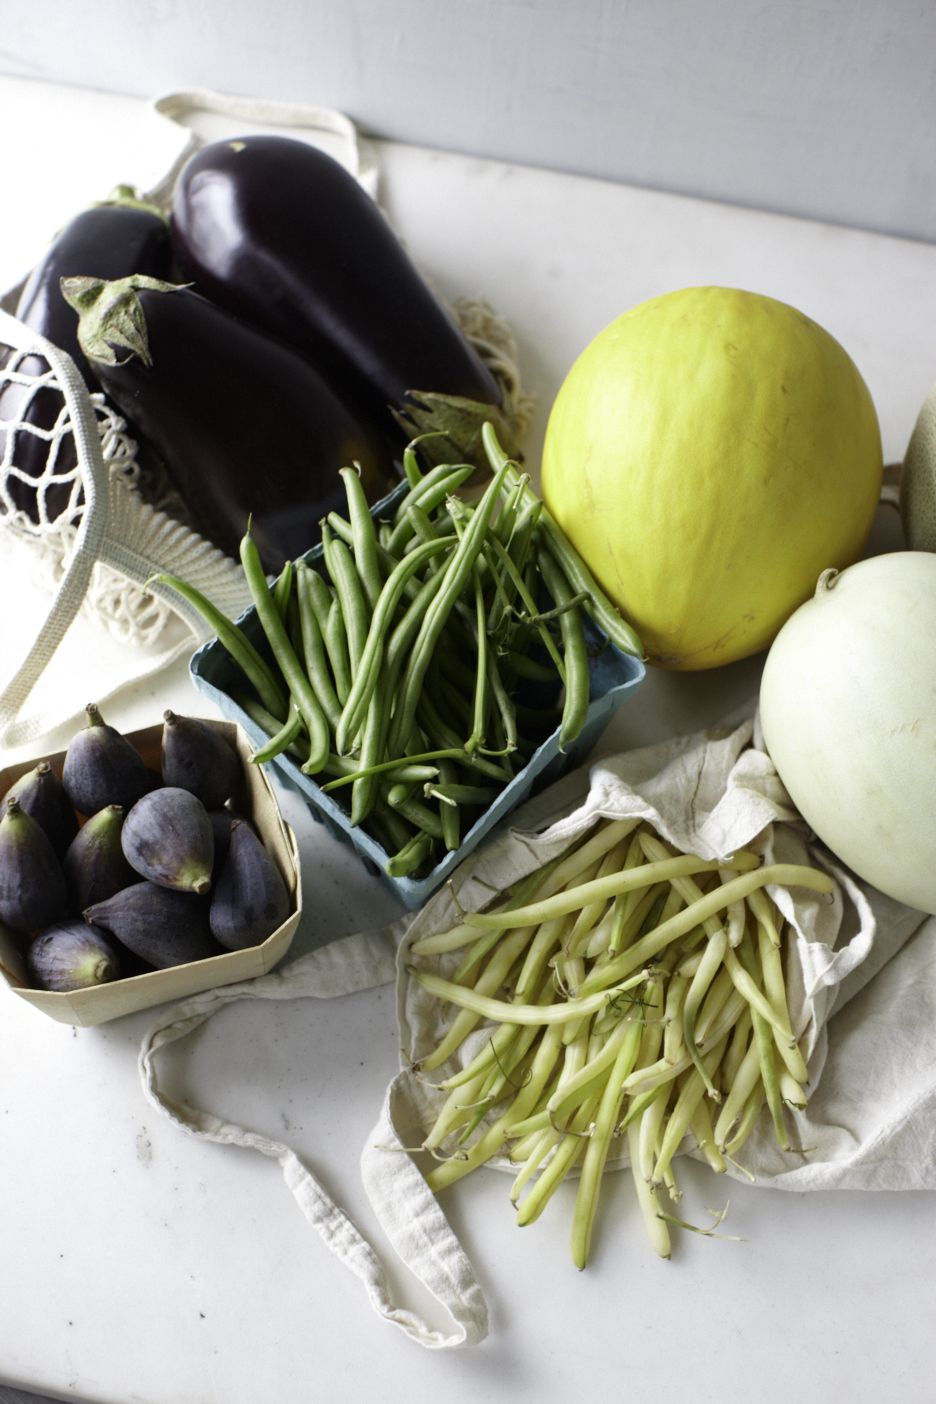 Late summer produce: eggplants, melons, figs, string beans